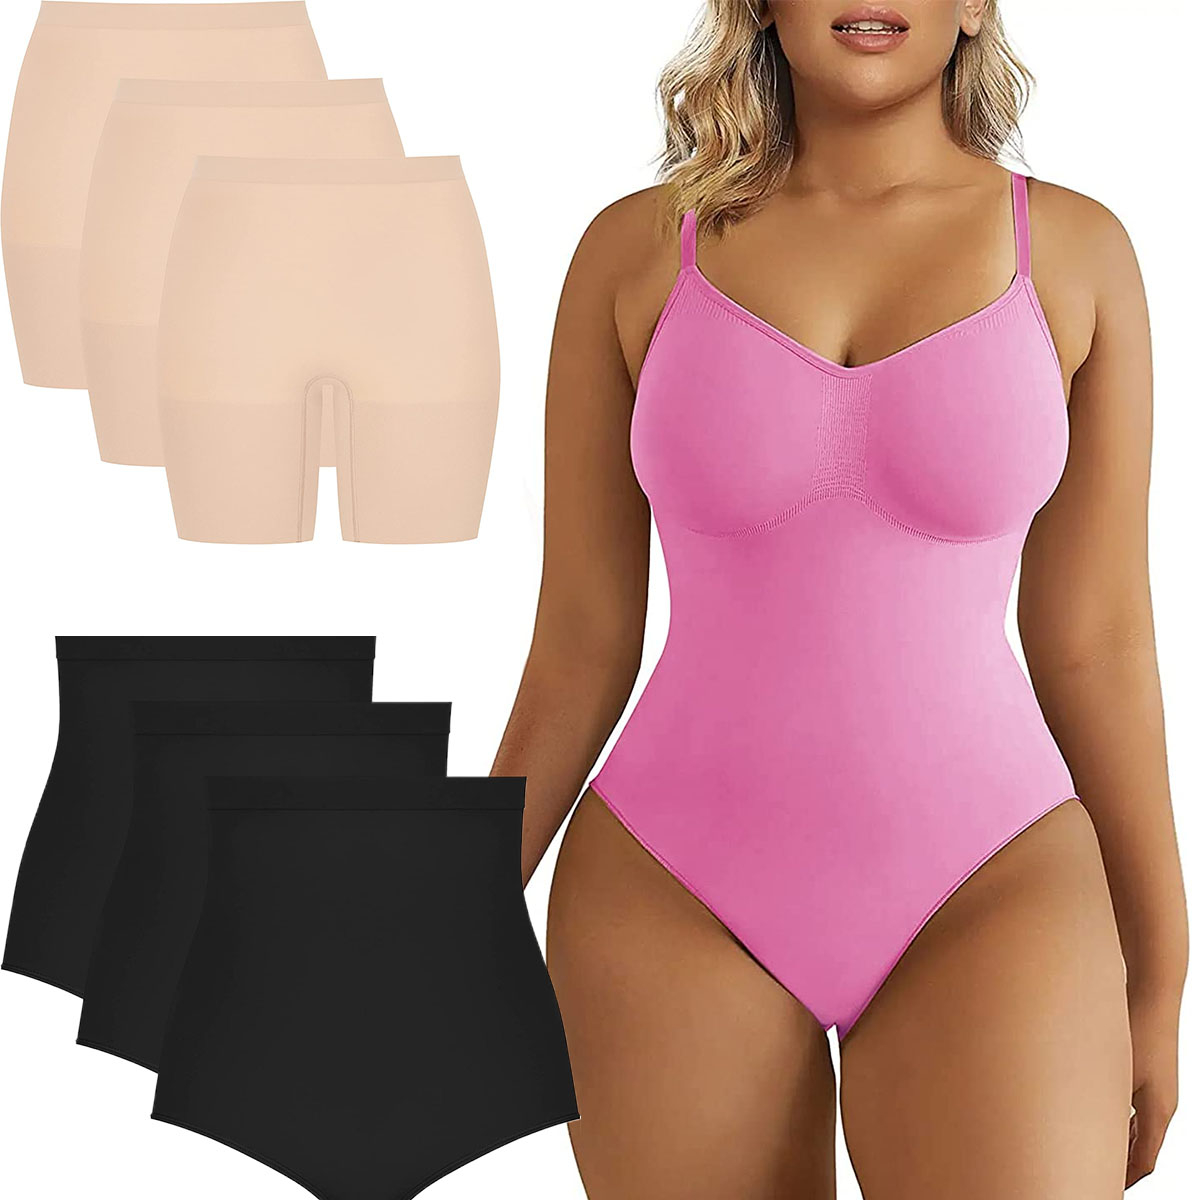 https://akns-images.eonline.com/eol_images/Entire_Site/202333/rs_1200x1200-230403082003-ECOMM_Shapewear_1200-.jpg?fit=around%7C1080:540&output-quality=90&crop=1080:540;center,top